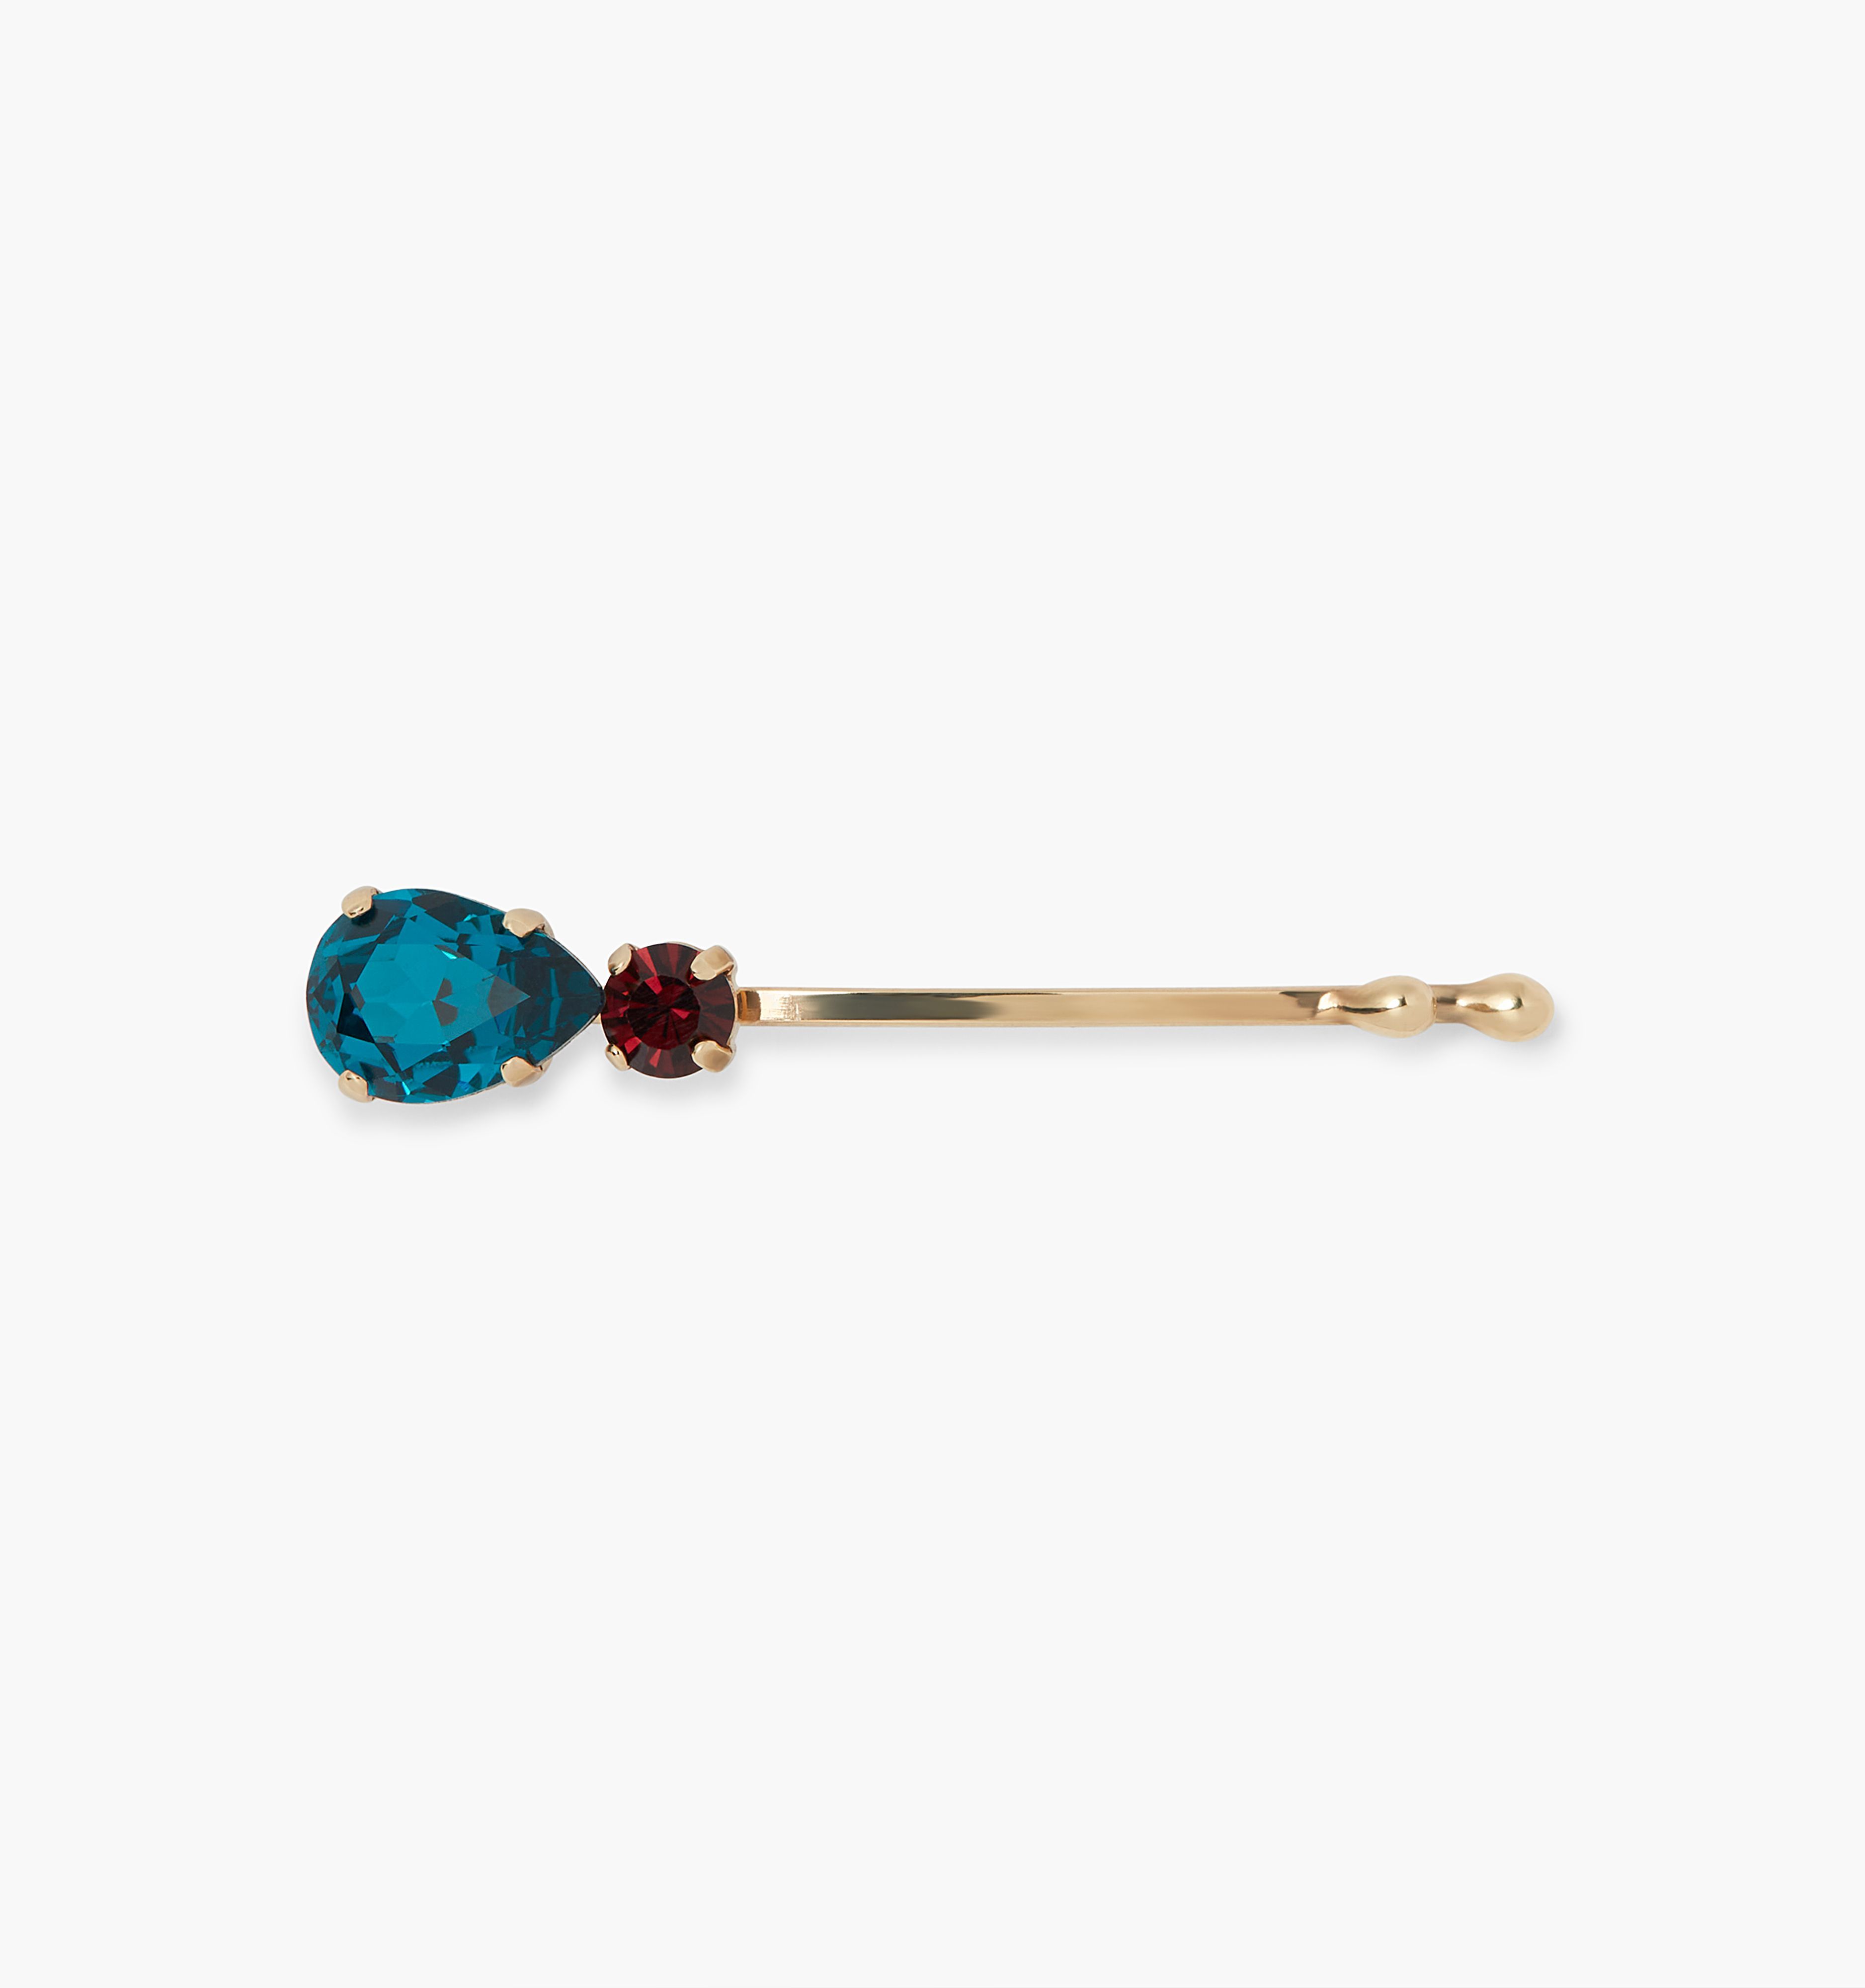 The Blue Combo Hair Pin